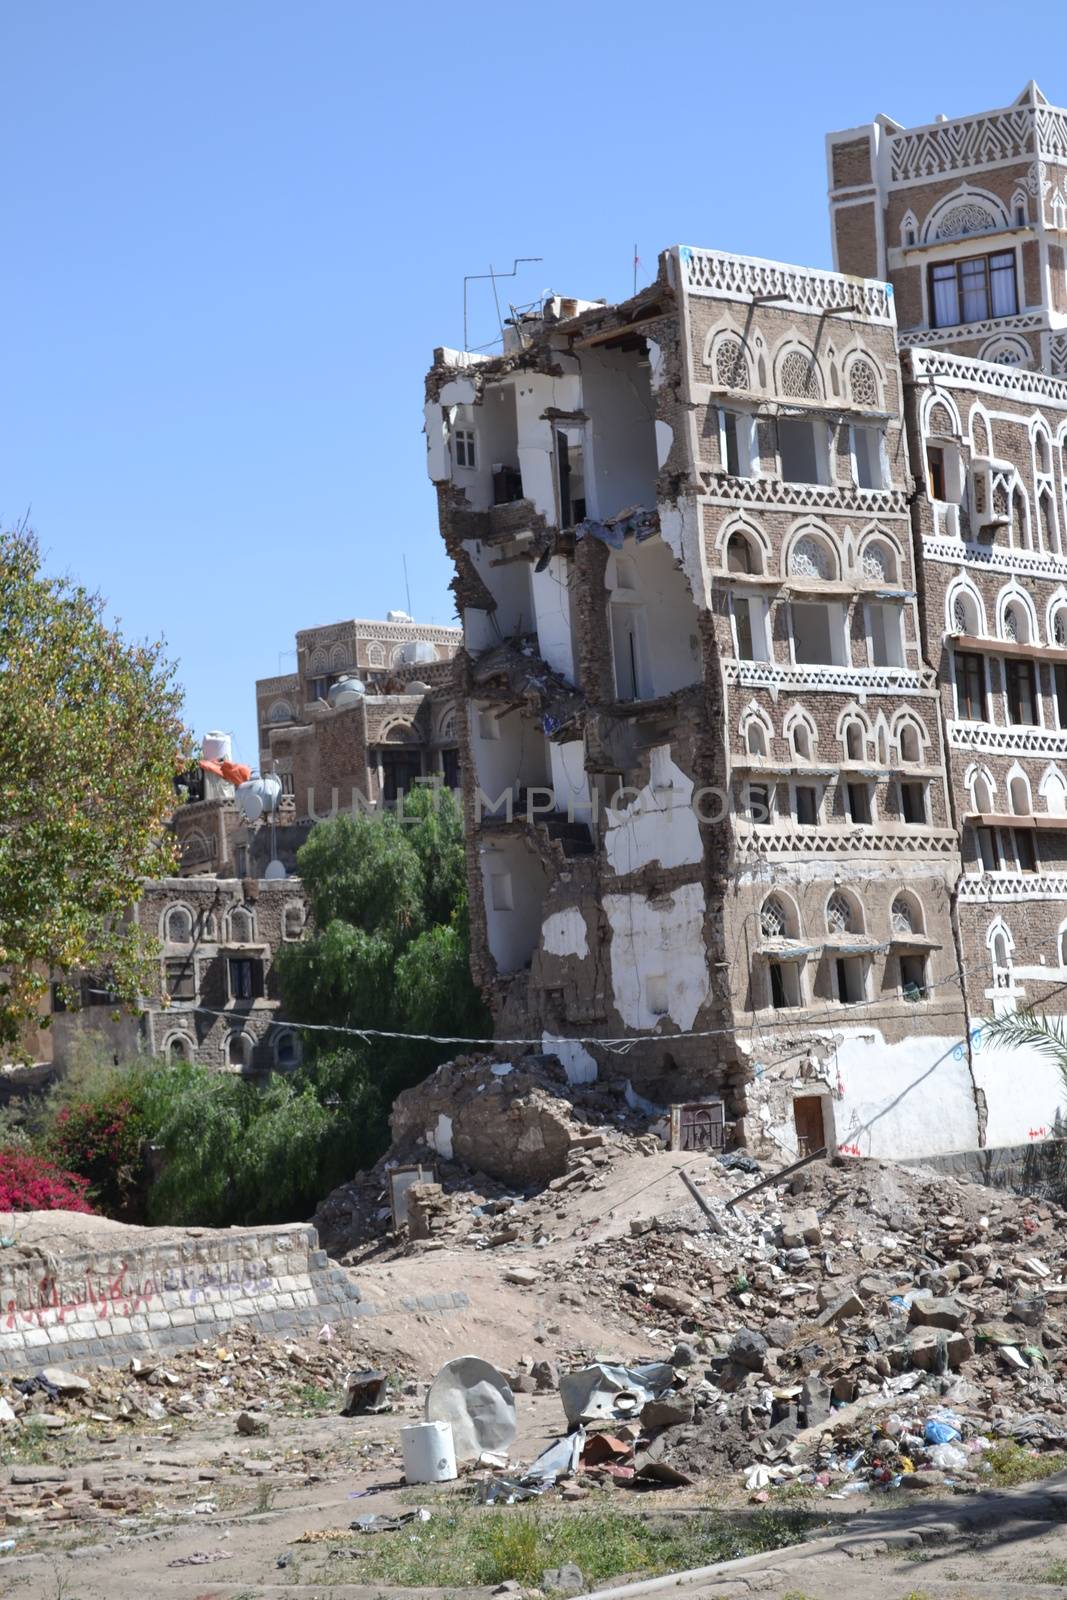 YEMEN, Sanaa: Destroyed or heavily damaged buildings are pictured in the al-Qassemi area of Sanaa Old City on September 29, 2015, months after a devastating wave of Saudi-led air strikes on Shia minority groups in Yemen.